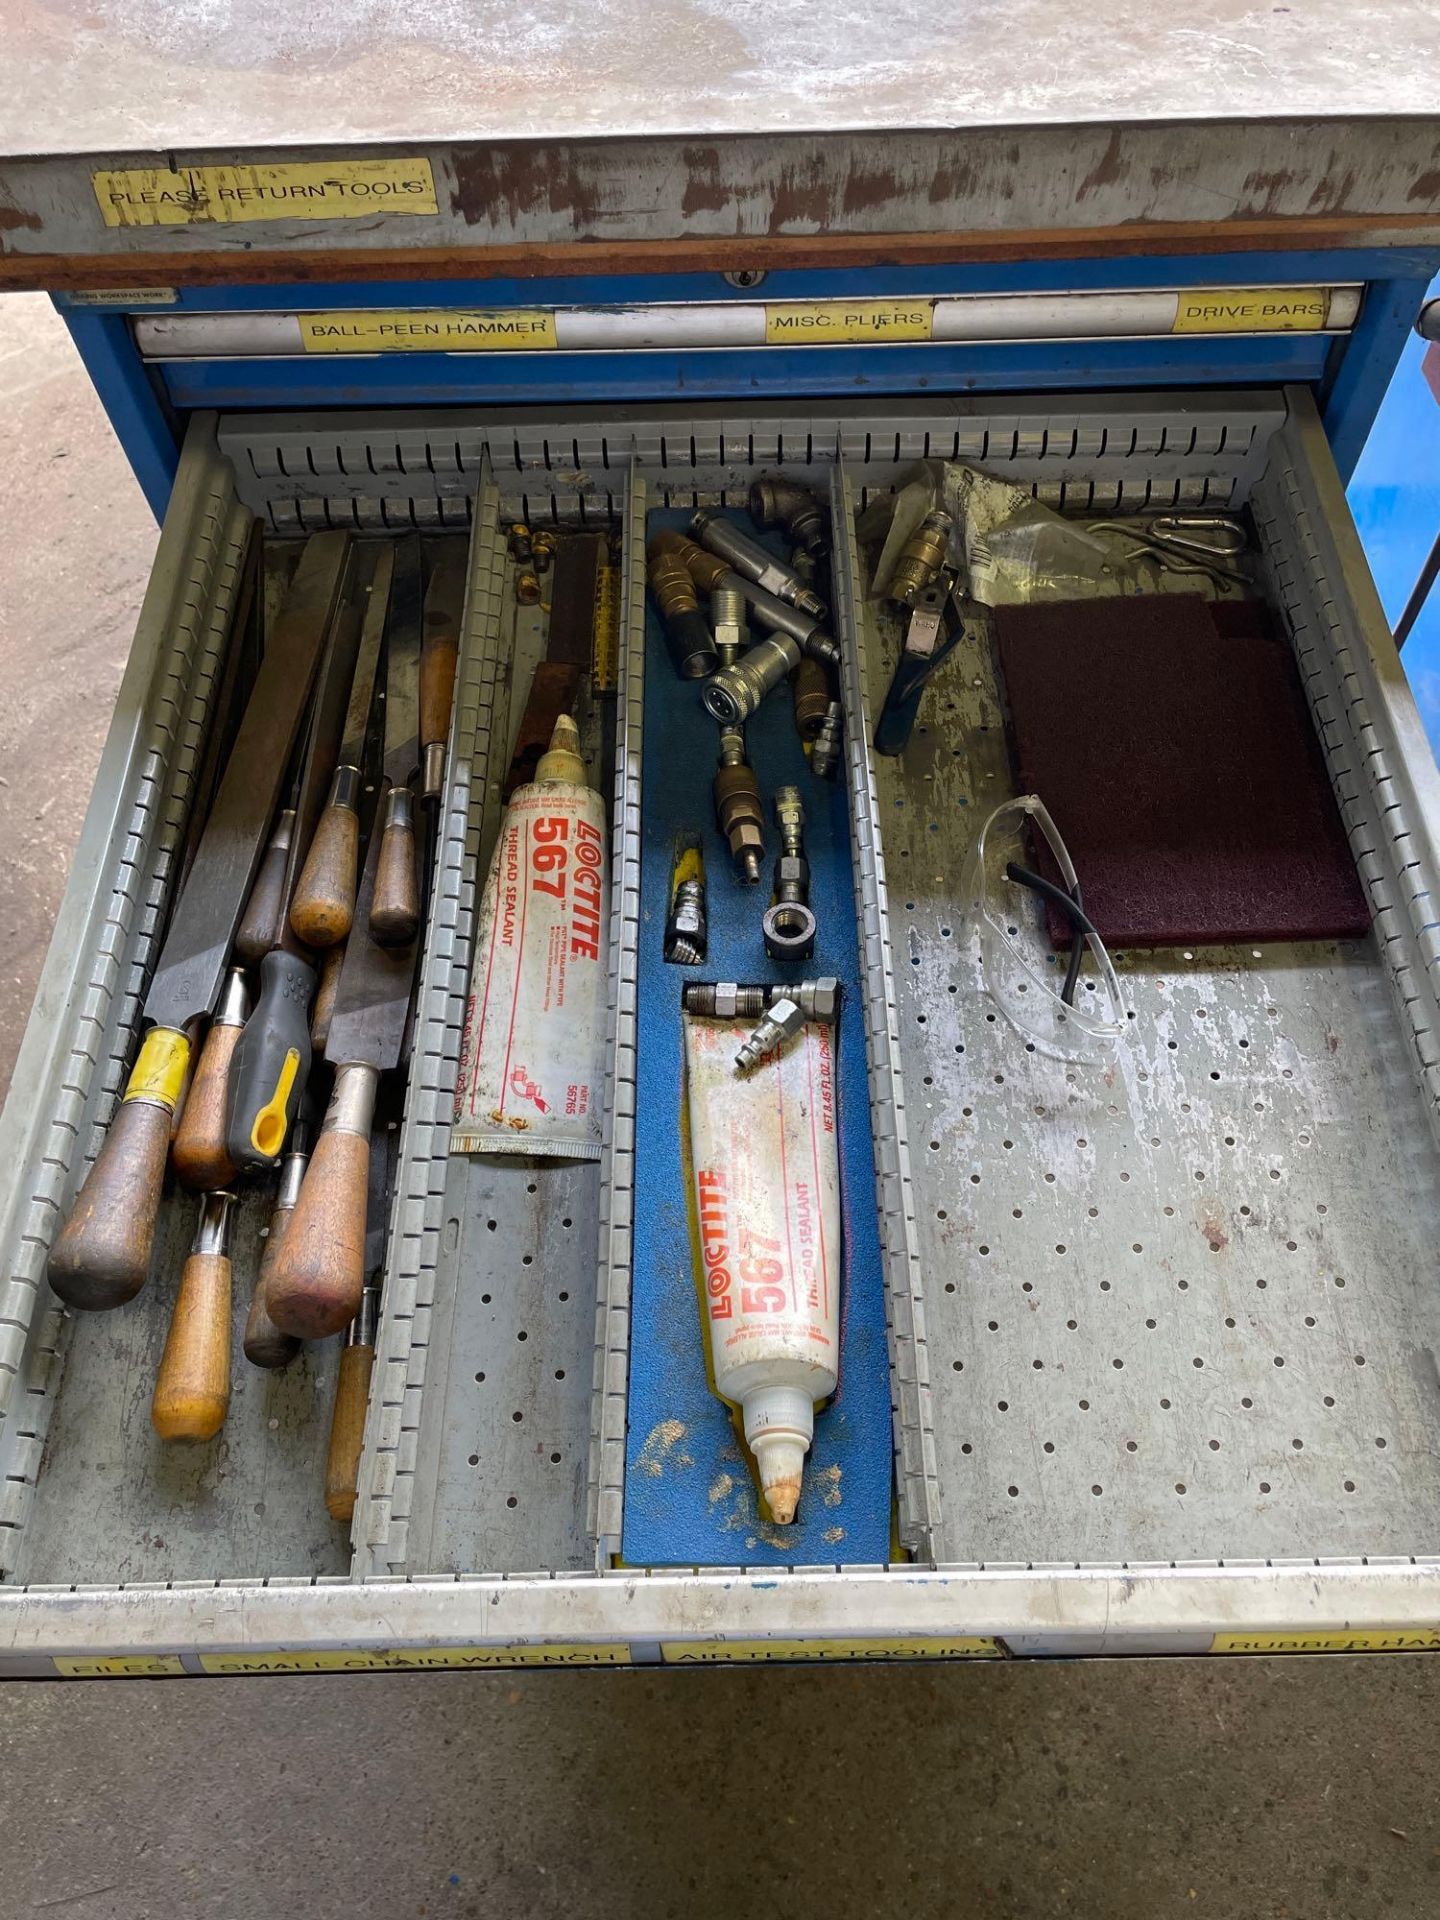 12 Drawer Work Table with Air Hose Reel on Base, with miscellaneous hand tools, taps, drill bits, Al - Image 7 of 32